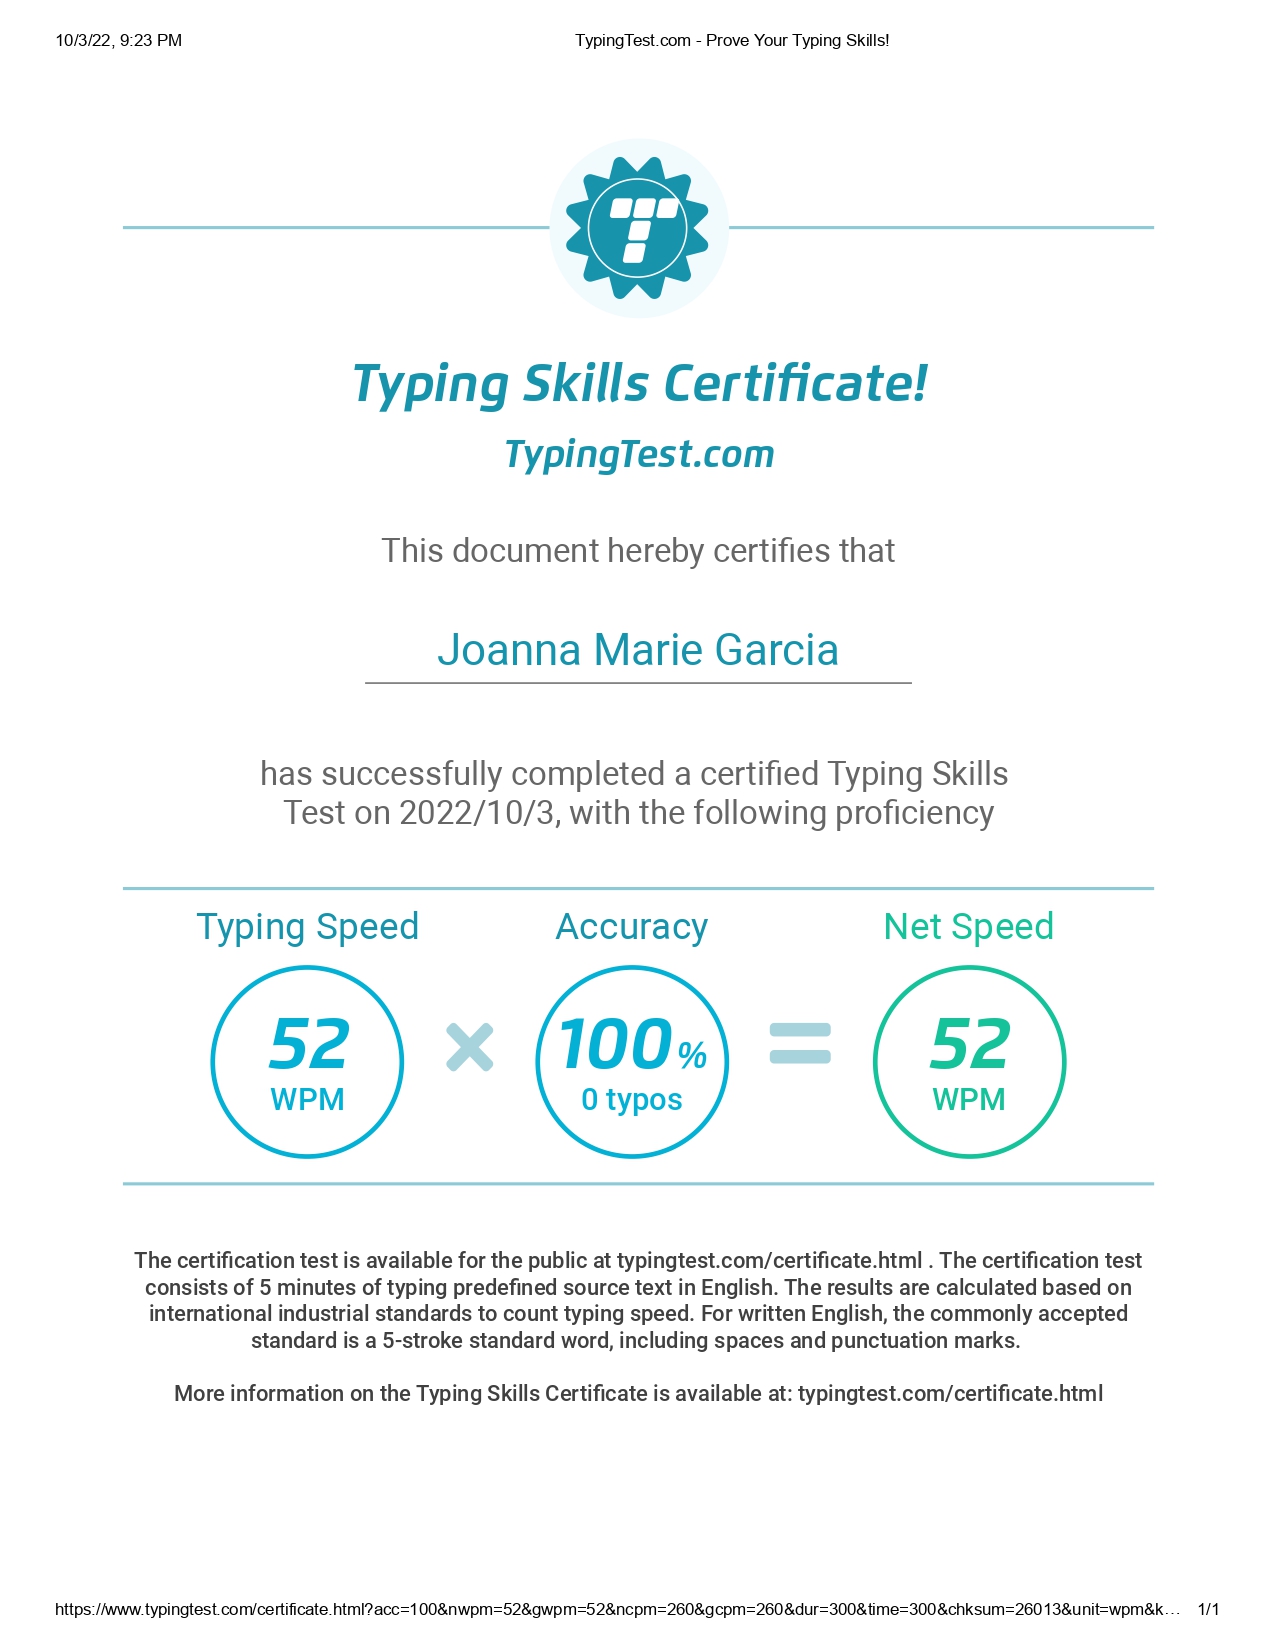 Typing Test Certificate